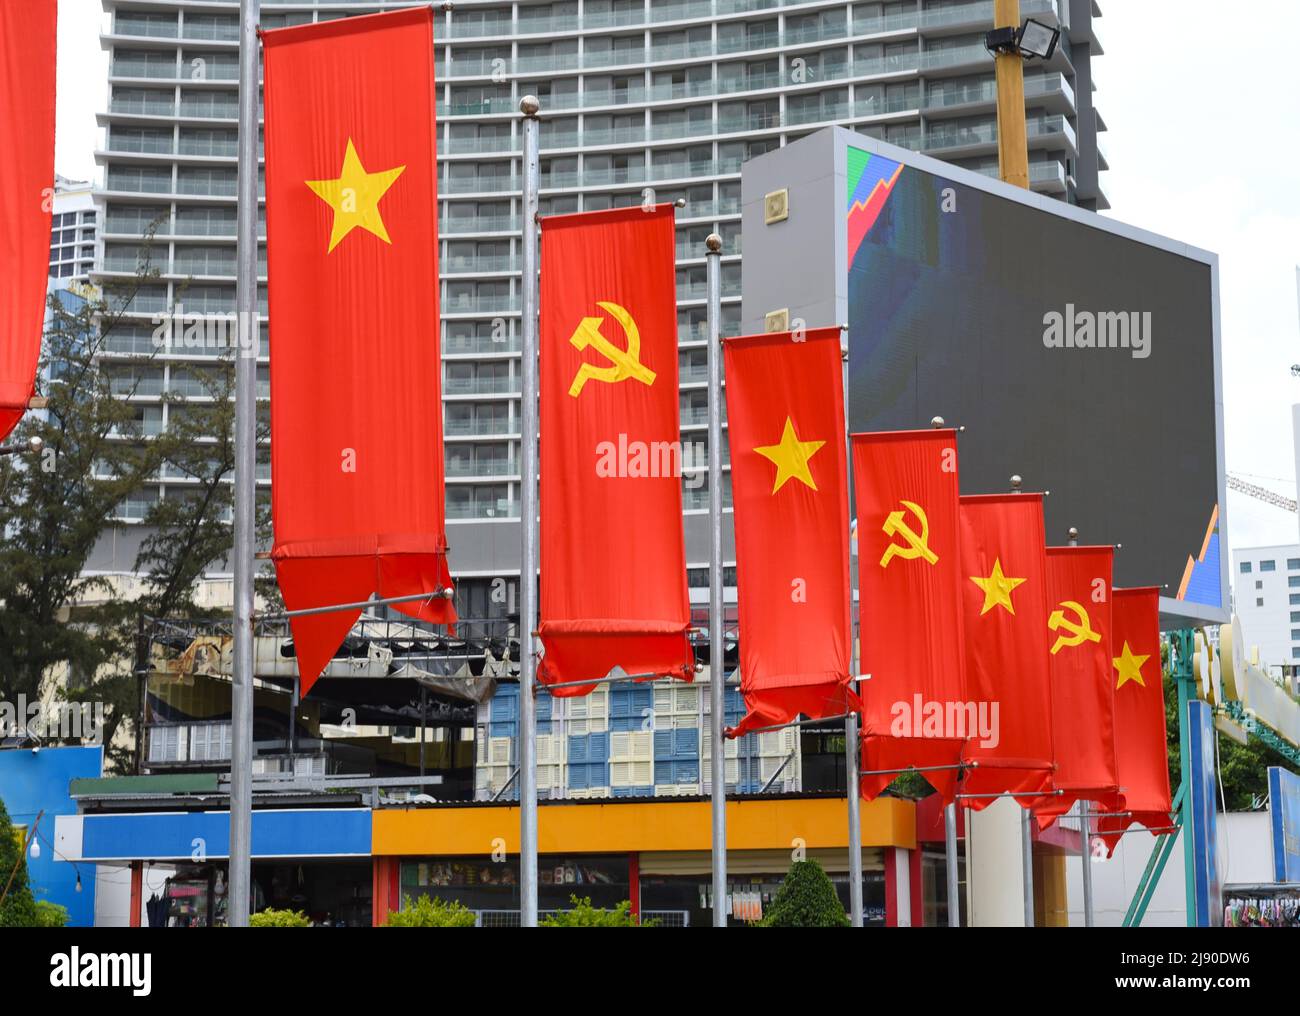 Vietnamese flags and communism flags in Nha Trang Vietnam Stock Photo